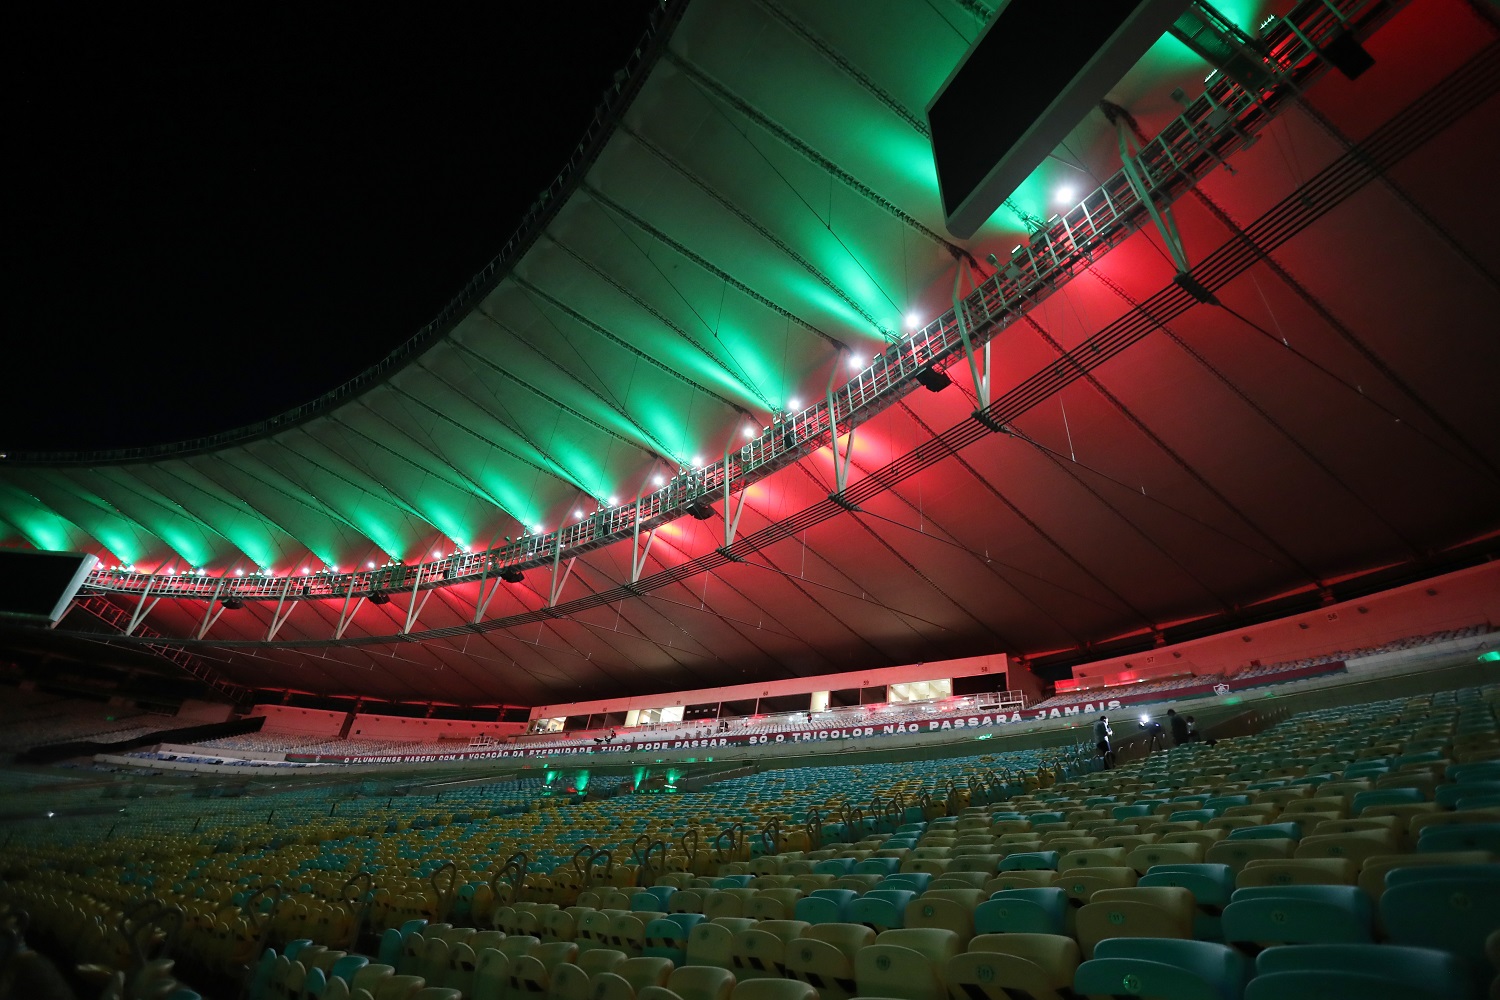 Rio abandons plan to rename Maracana stadium after Pele - Our Today